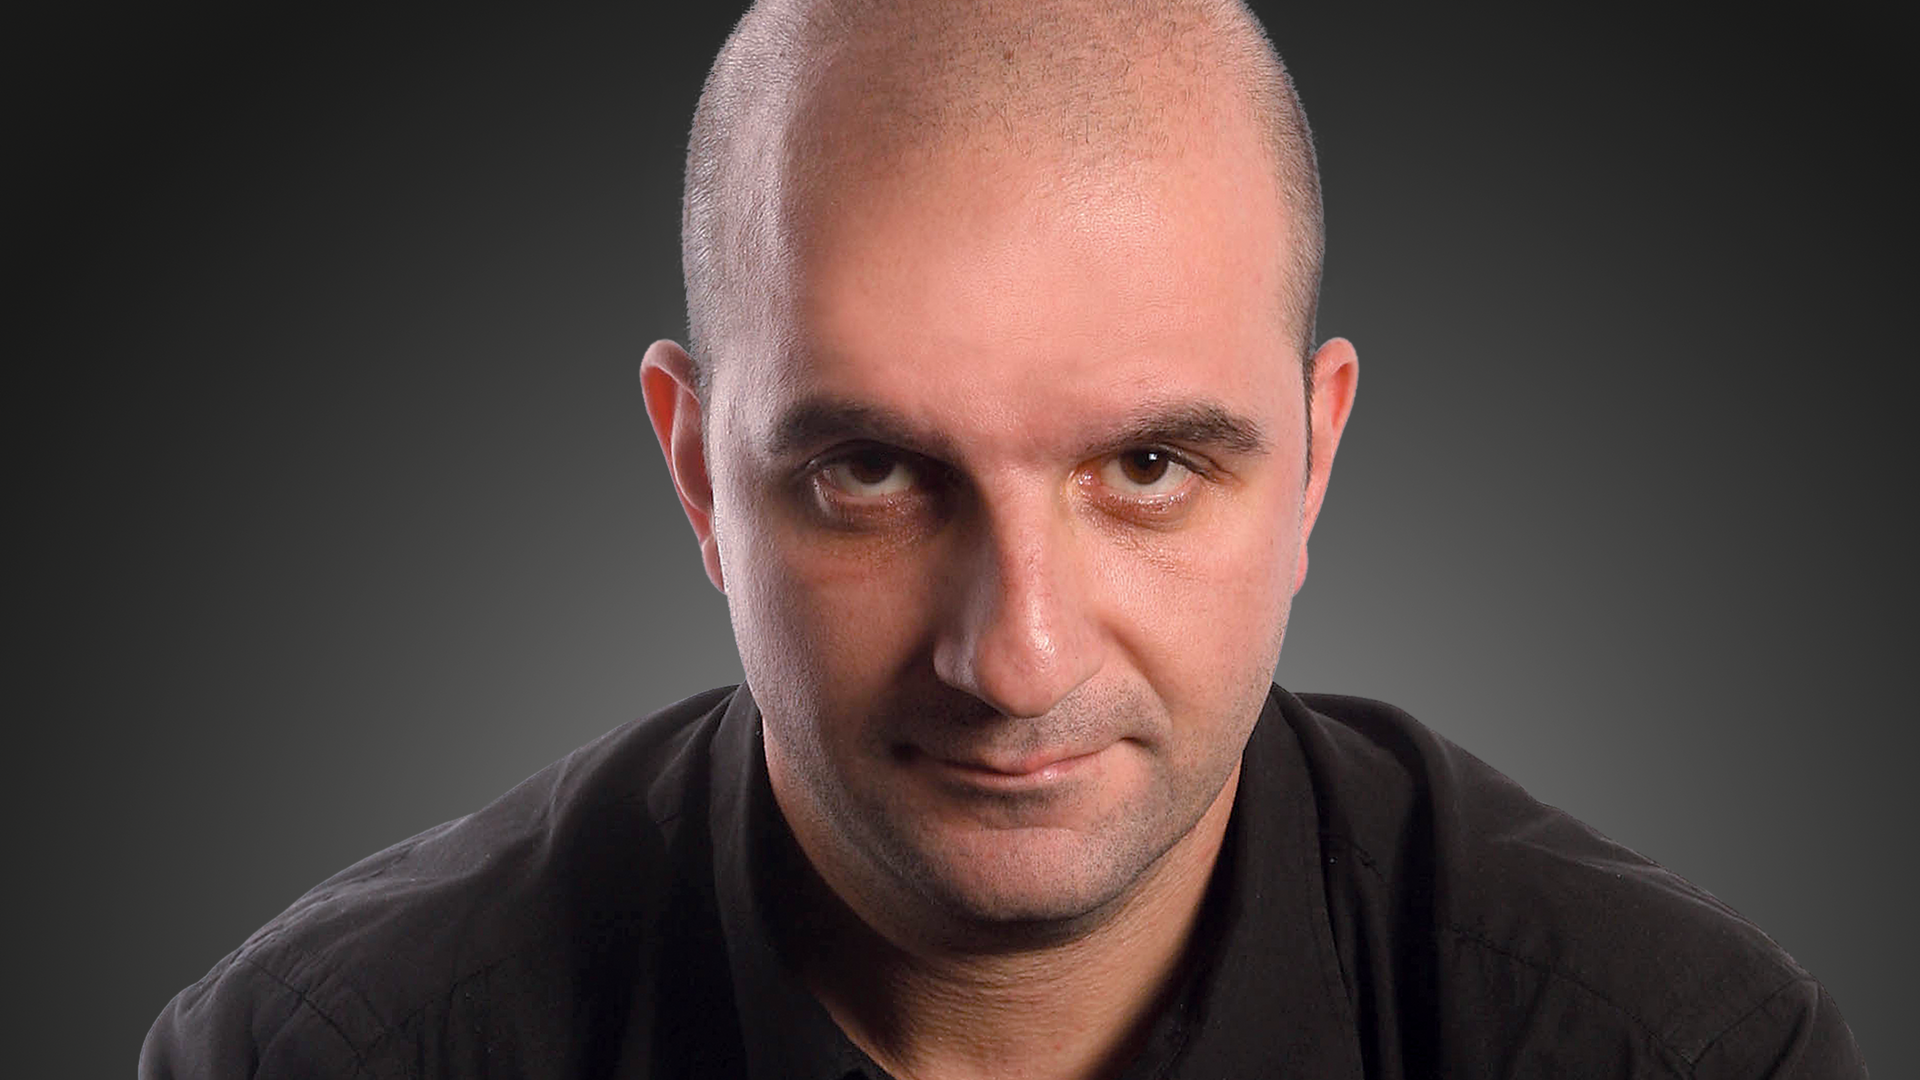 A bald young man looking straight to the camera on a dark background